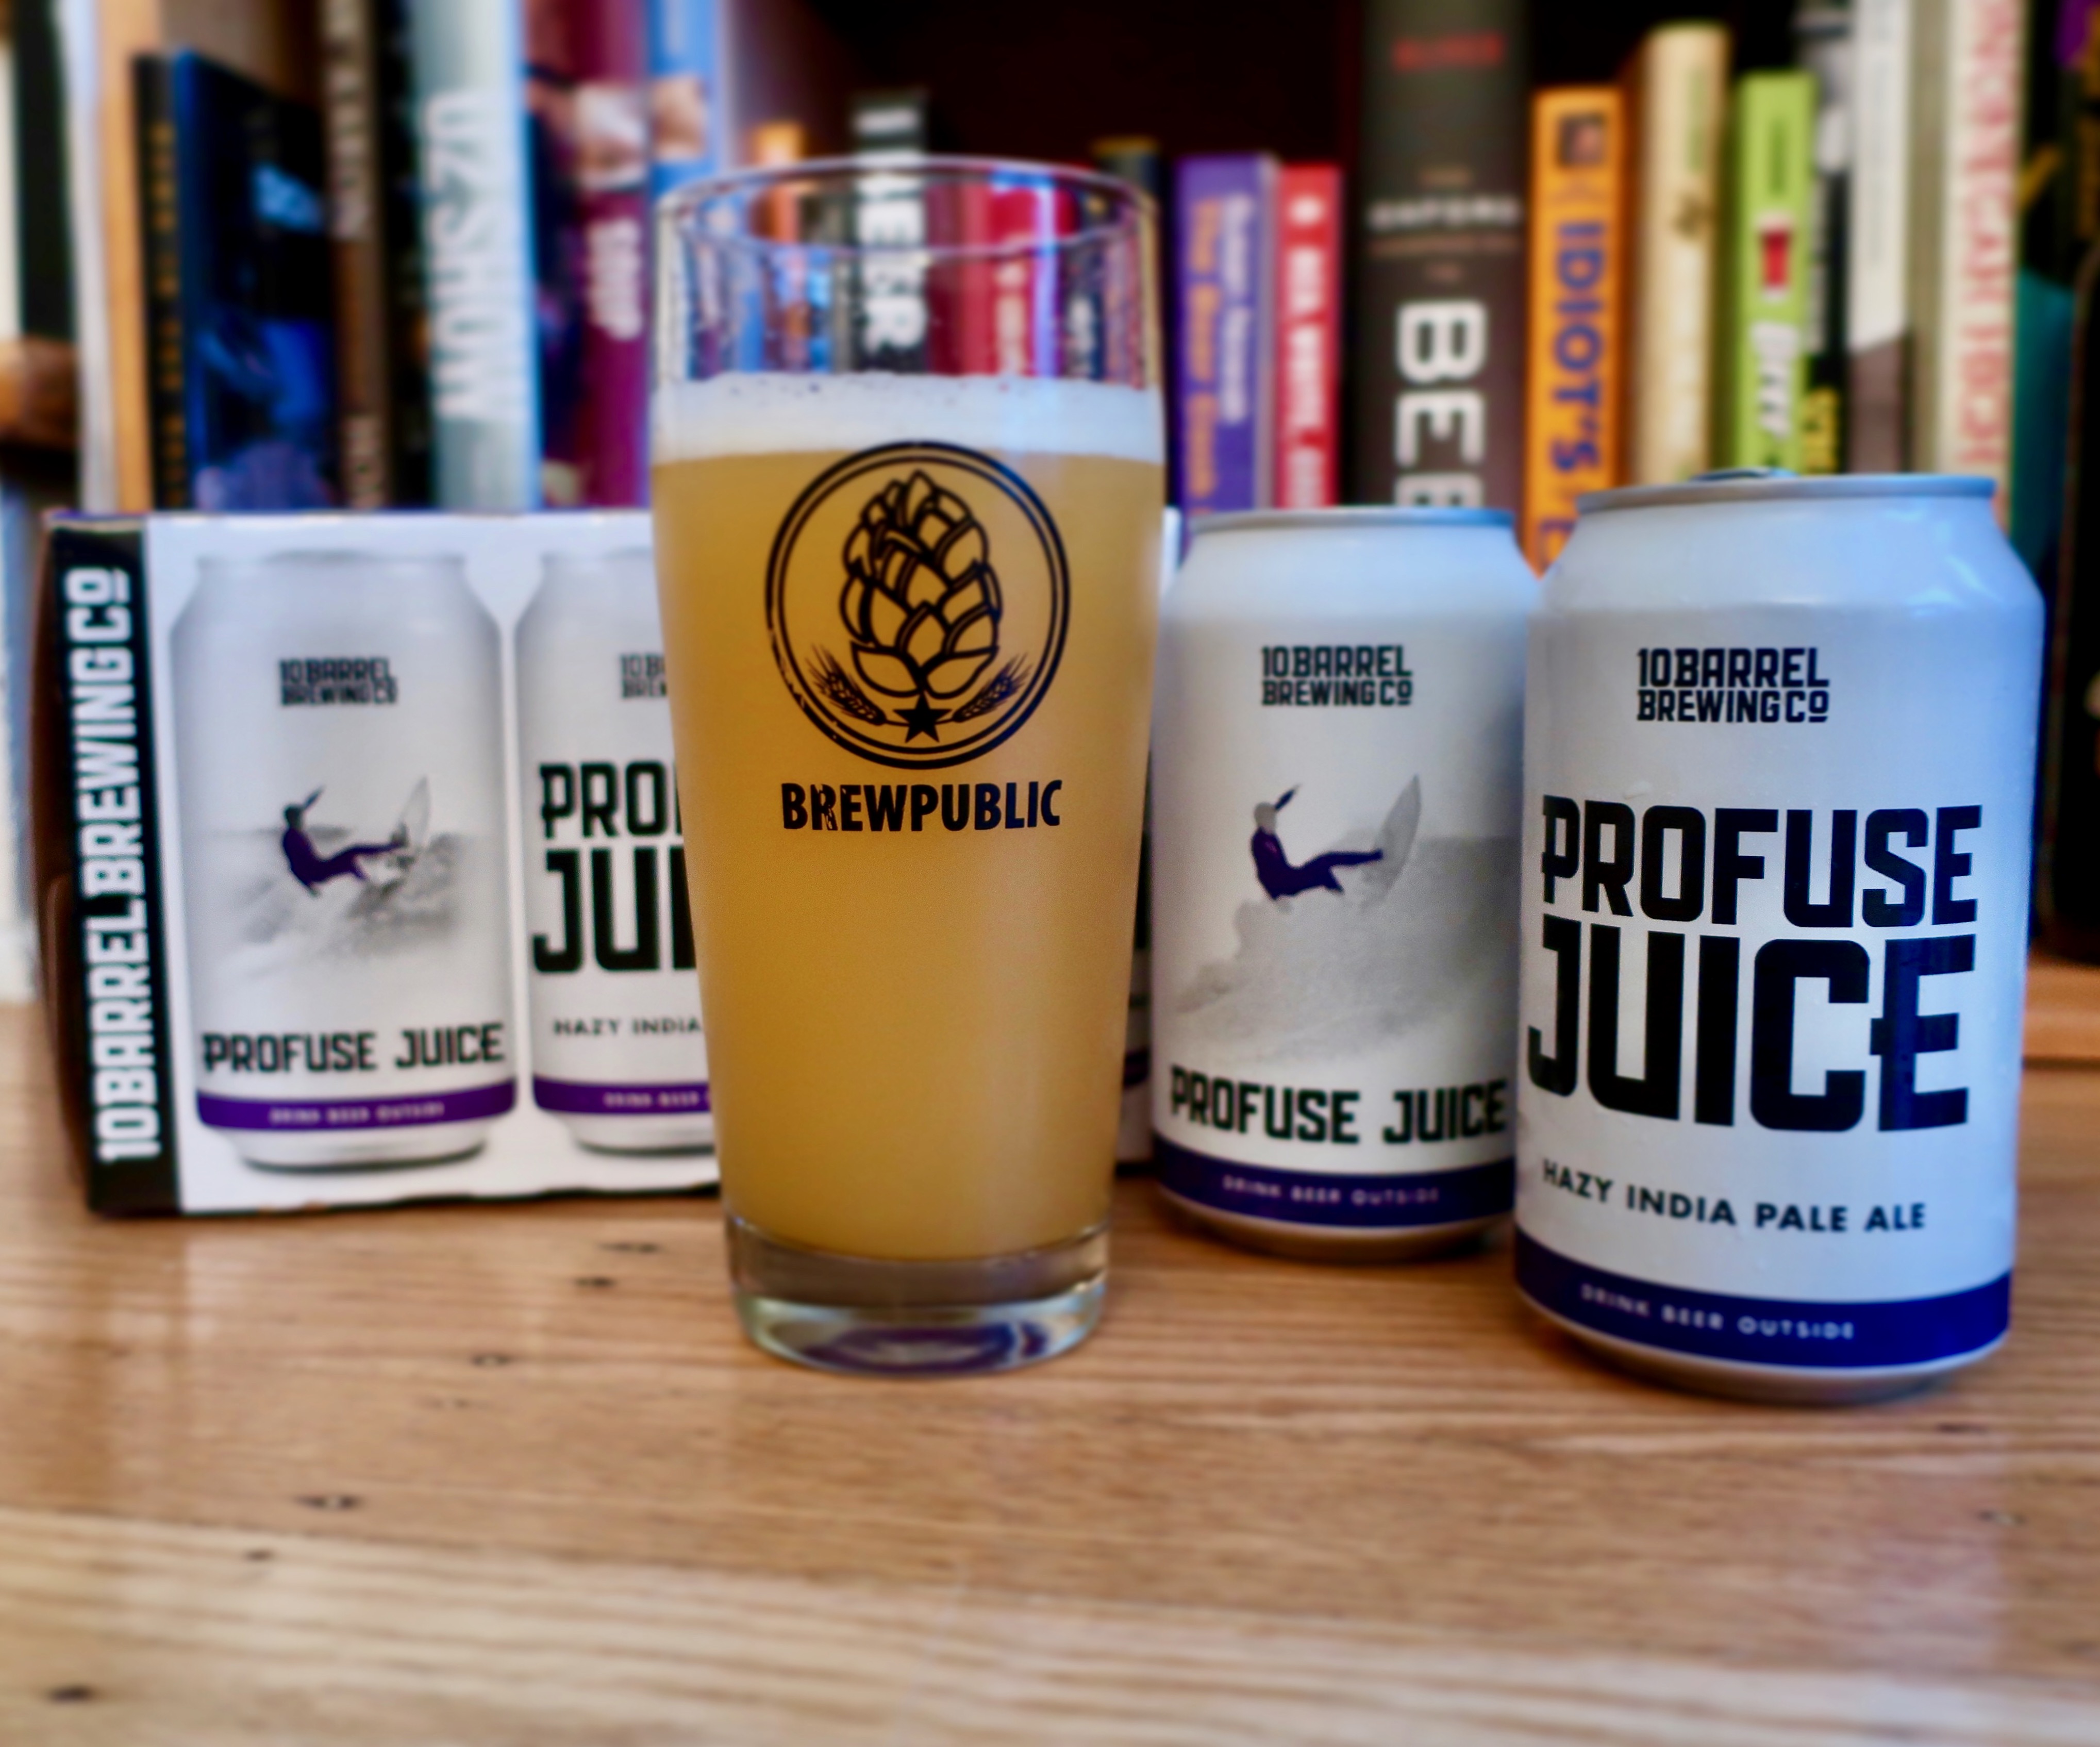 Profuse Juice Hazy IPA from 10 Barrel Brewing served in a BREWPUBLIC glass.